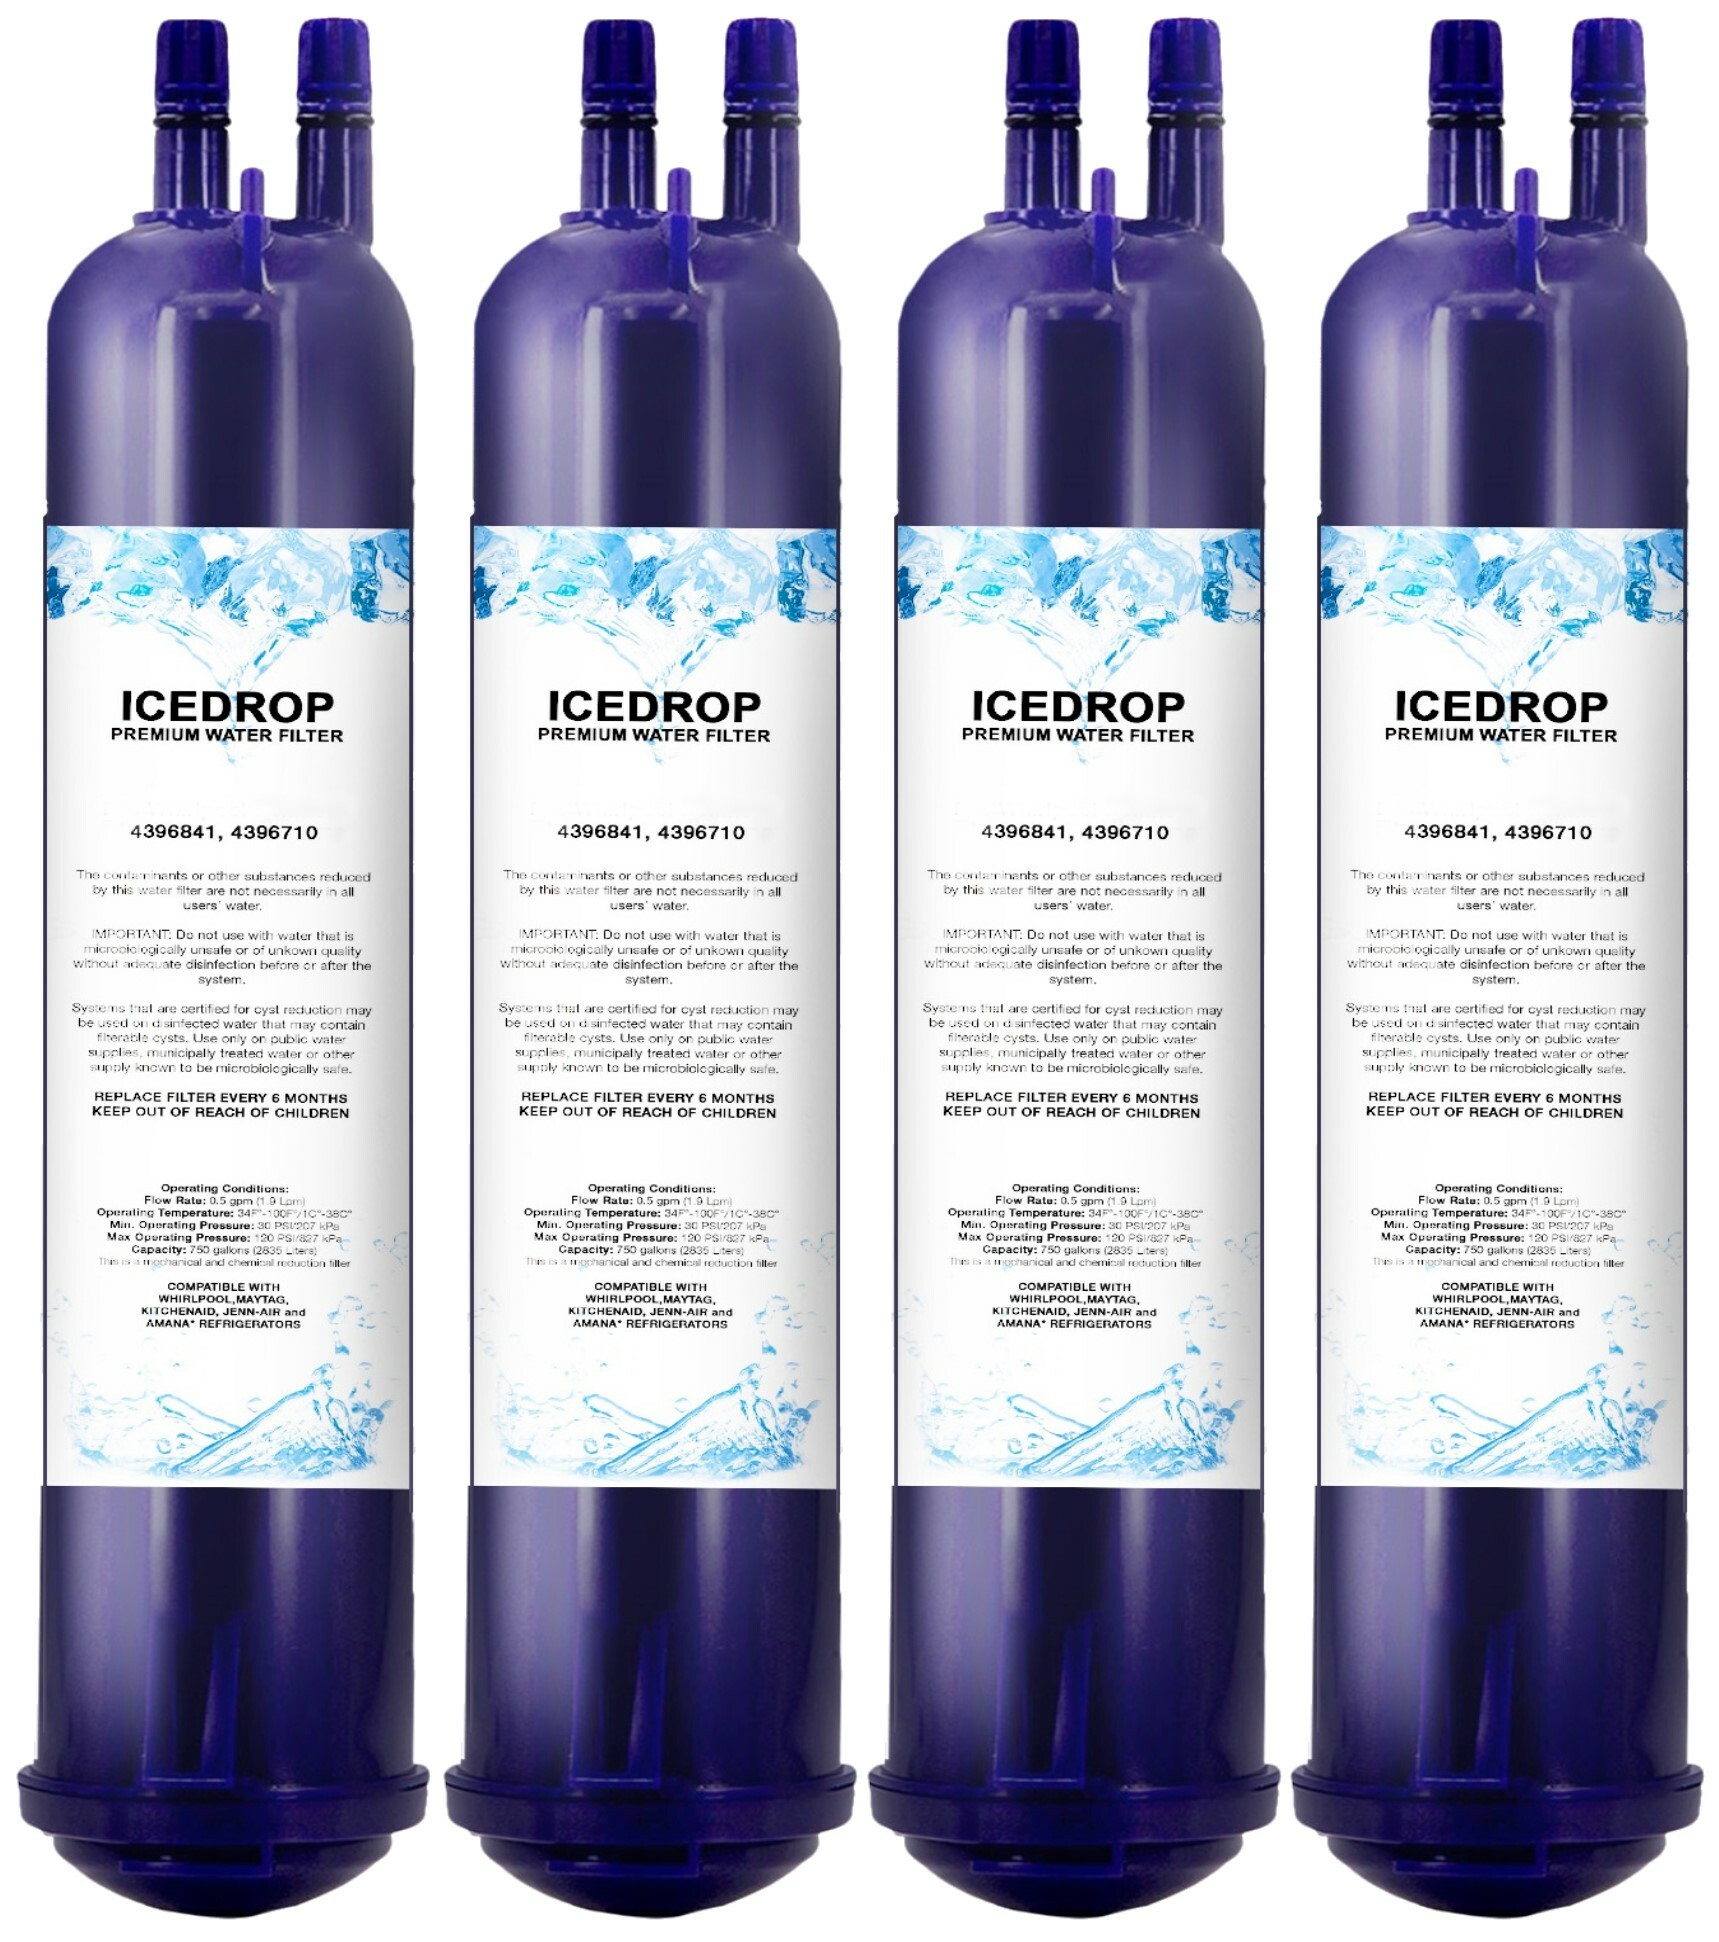 Ice Drop Refrigerator Water Filter Compatible with WF710 4396841 Kenmore 469020P 469083 T1RFKB1 TIRFKB2 (4 Pack)